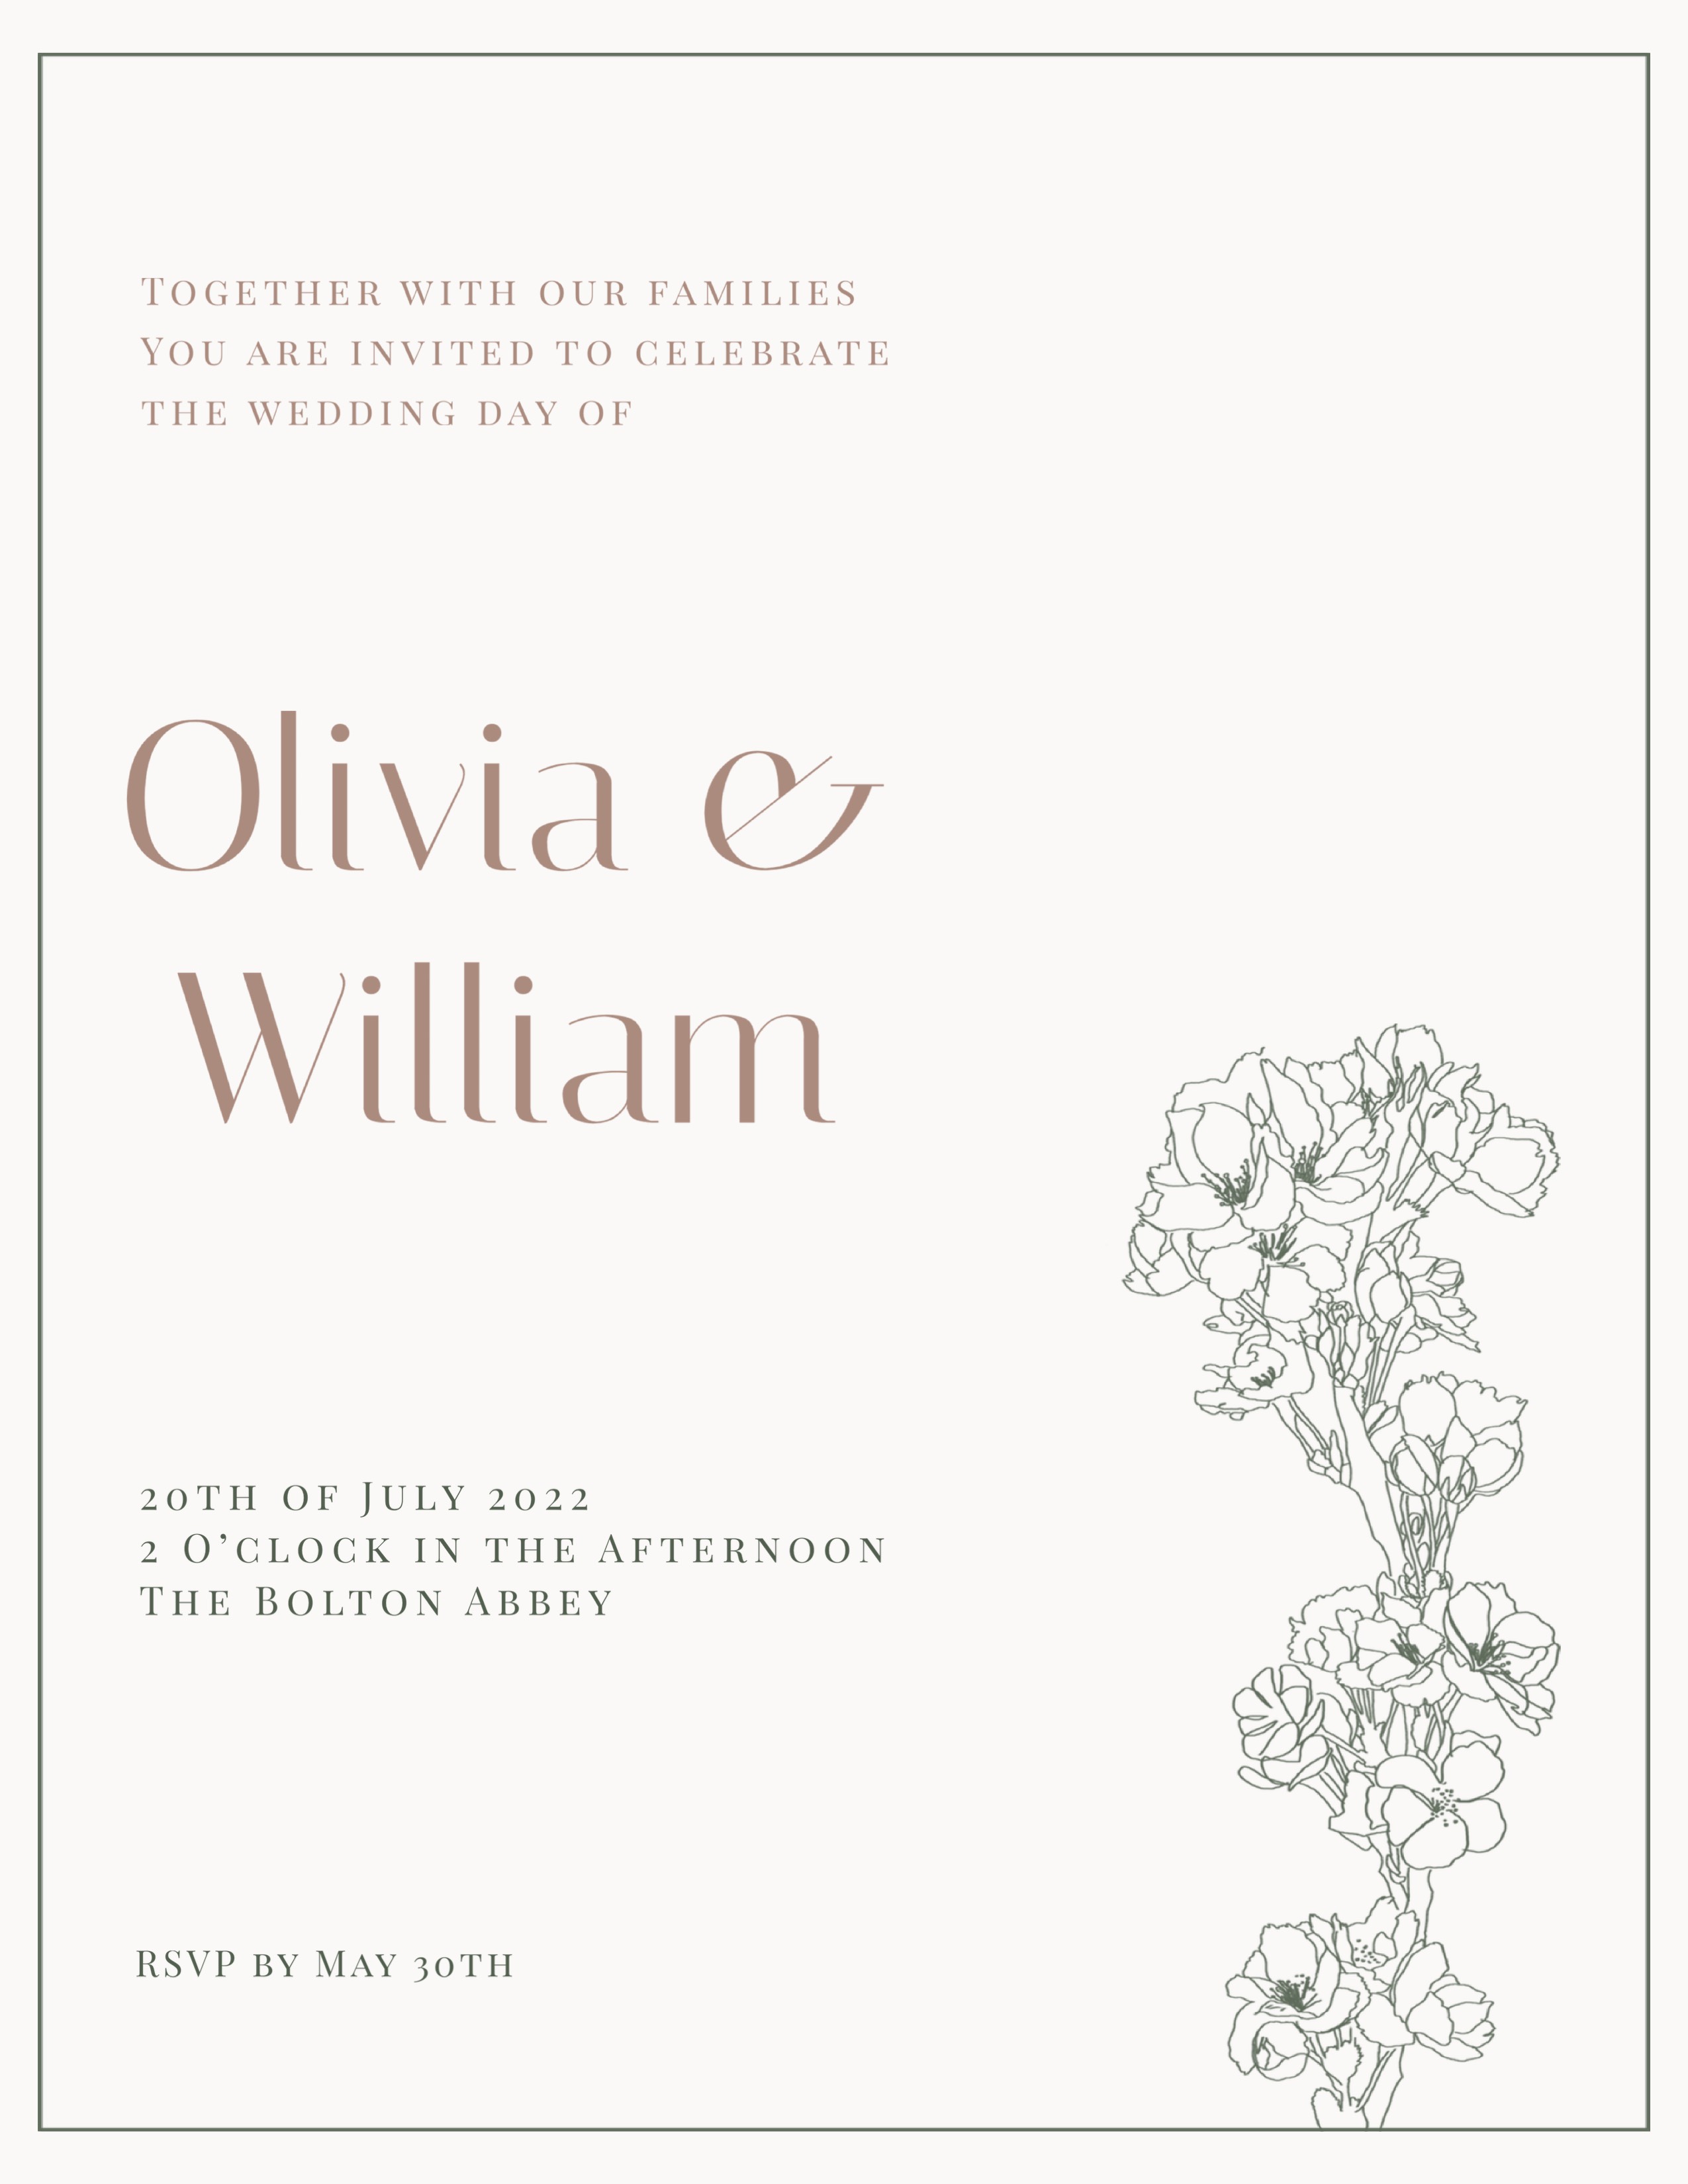 A Wedding Card With Flowers On It Wedding Template